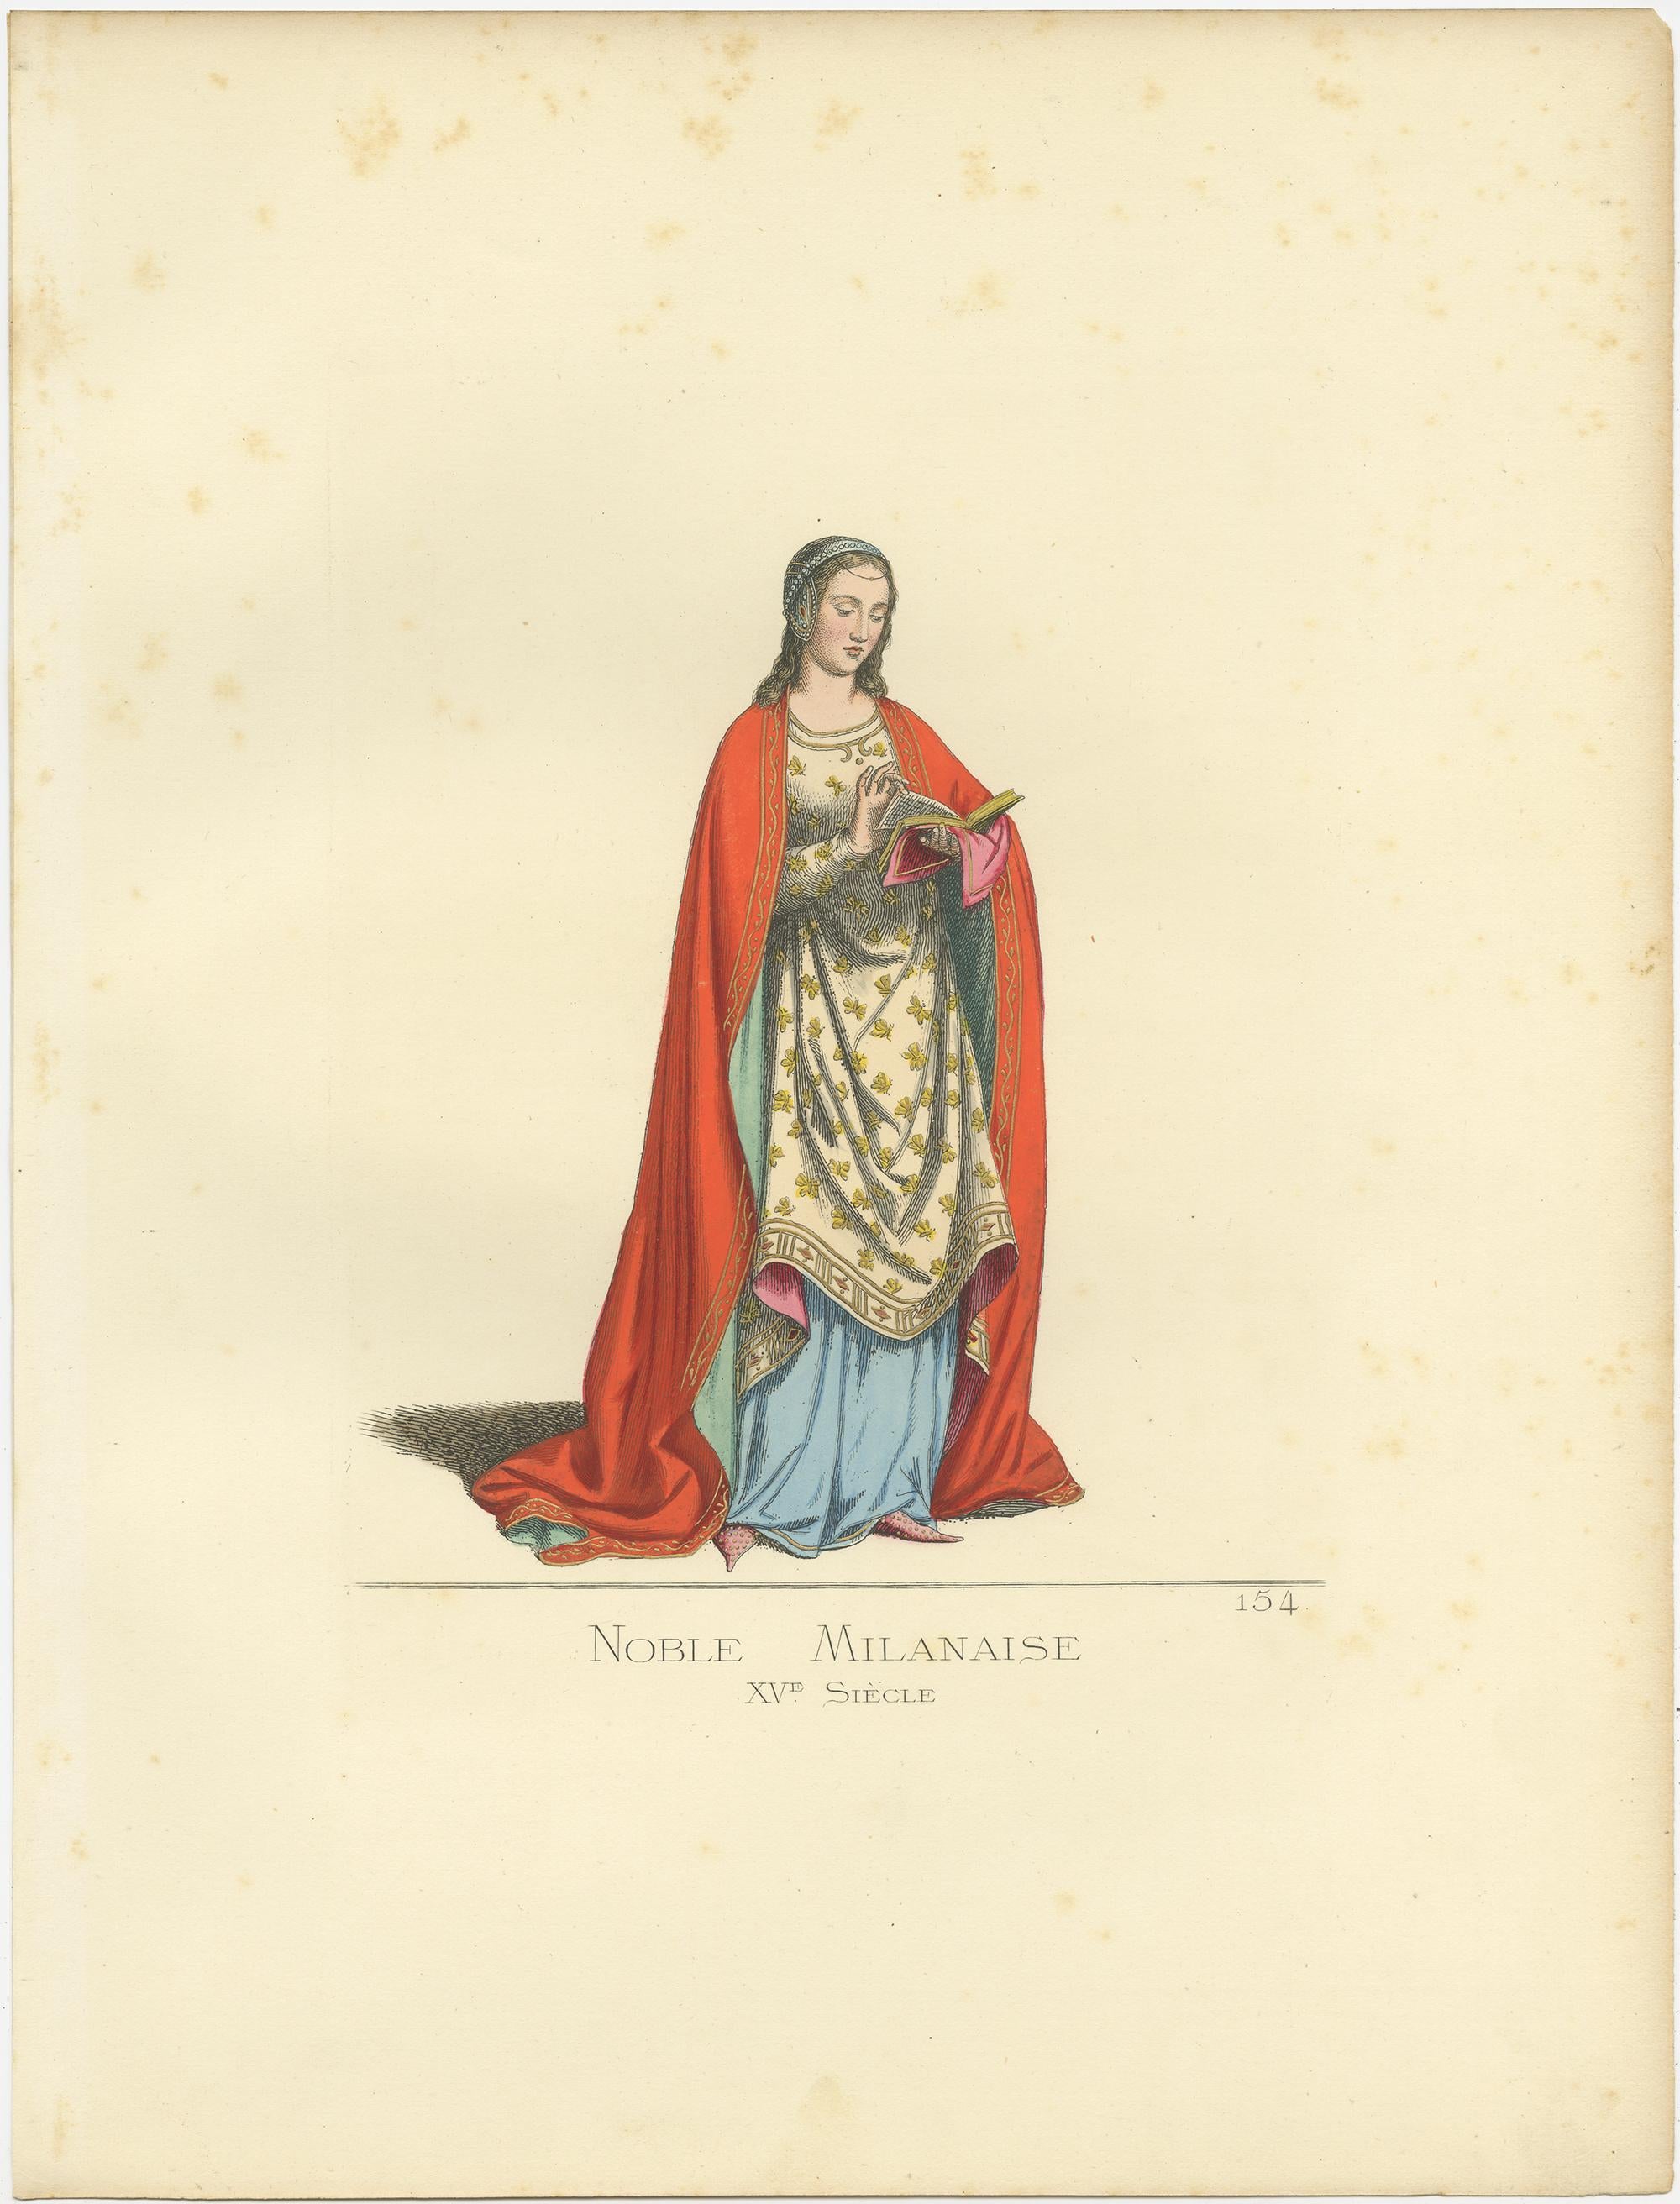 Antique print titled ‘Noble Milanaise, XVe Siecle.’ Original antique print of a Noblewoman from Milan in Italy, 15th century. This print originates from 'Costumes historiques de femmes du XIII, XIV et XV siècle' by C. Bonnard. Published 1860.